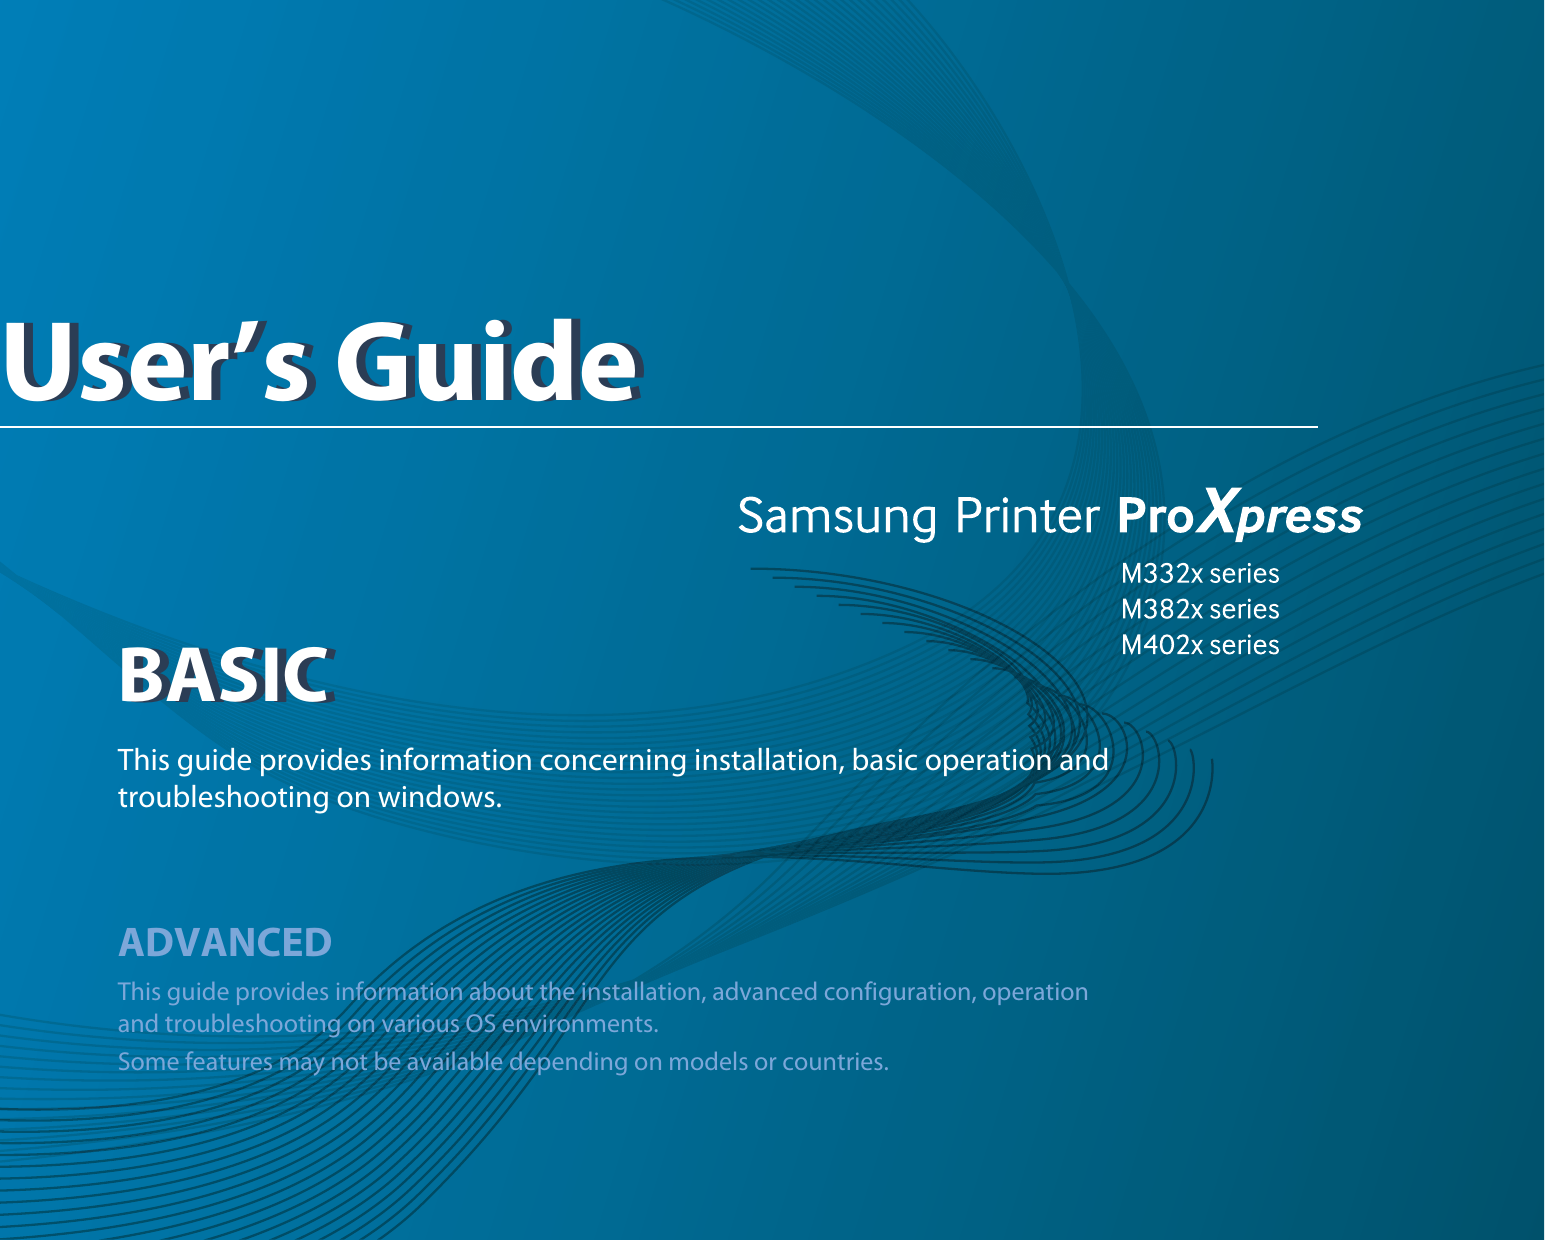 BASICUser’s GuideBASICUser’s GuideThis guide provides information concerning installation, basic operation and troubleshooting on windows.ADVANCEDThis guide provides information about the installation, advanced configuration, operation and troubleshooting on various OS environments. Some features may not be available depending on models or countries.